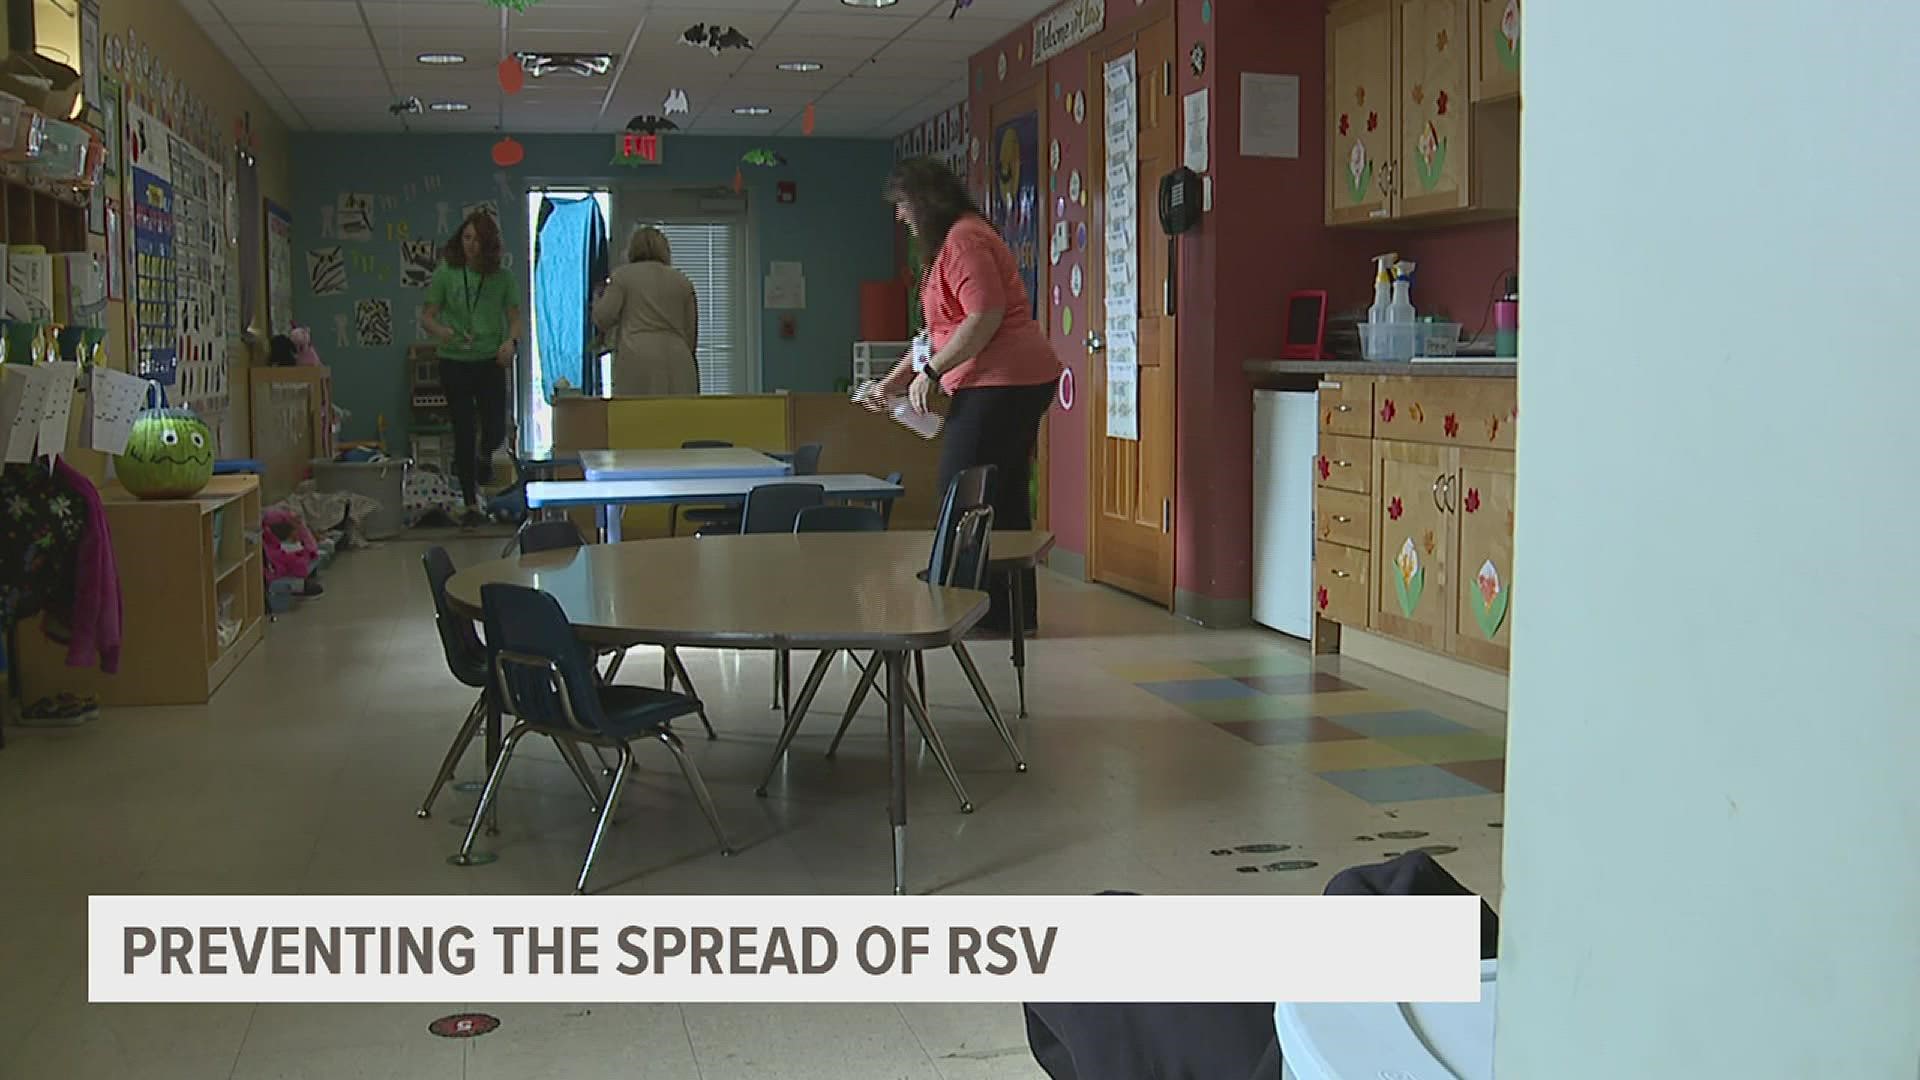 Absolutely Positively Kids is taking extra caution in cleaning its classrooms as RSV cases rise in the Quad Cities.